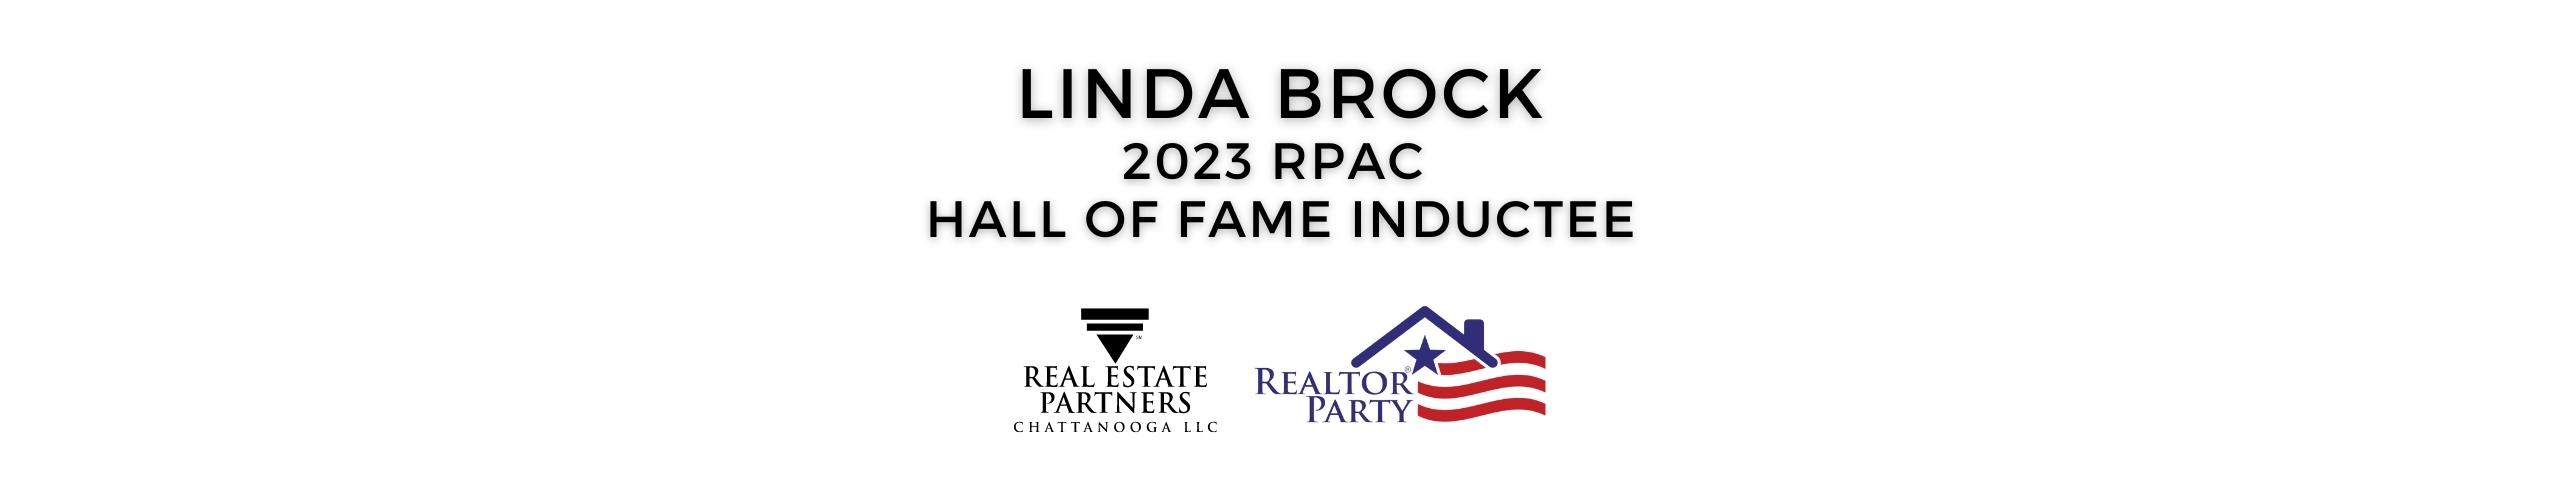 REALTOR® Linda Brock inducted into RPAC Hall of Fame 